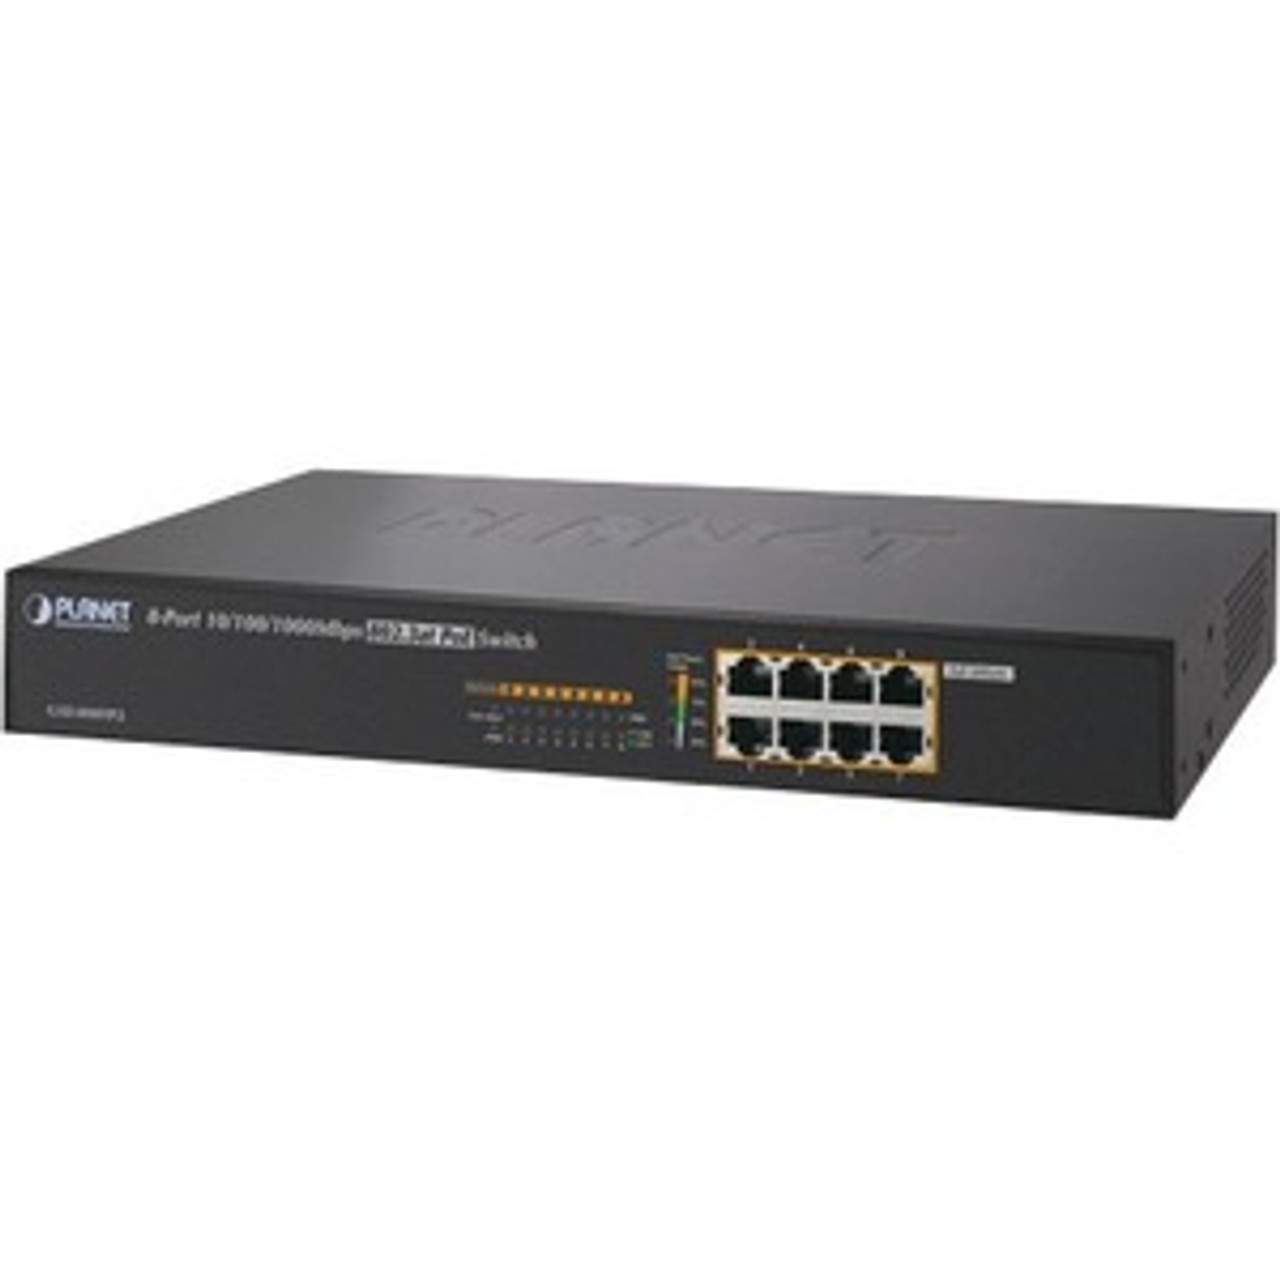 GSD-808HP2 Planet Technology 8-Ports 10/100/1000 Gigabit Ethernet Switch with 8-Ports 802.3at POE+ (Refurbished)